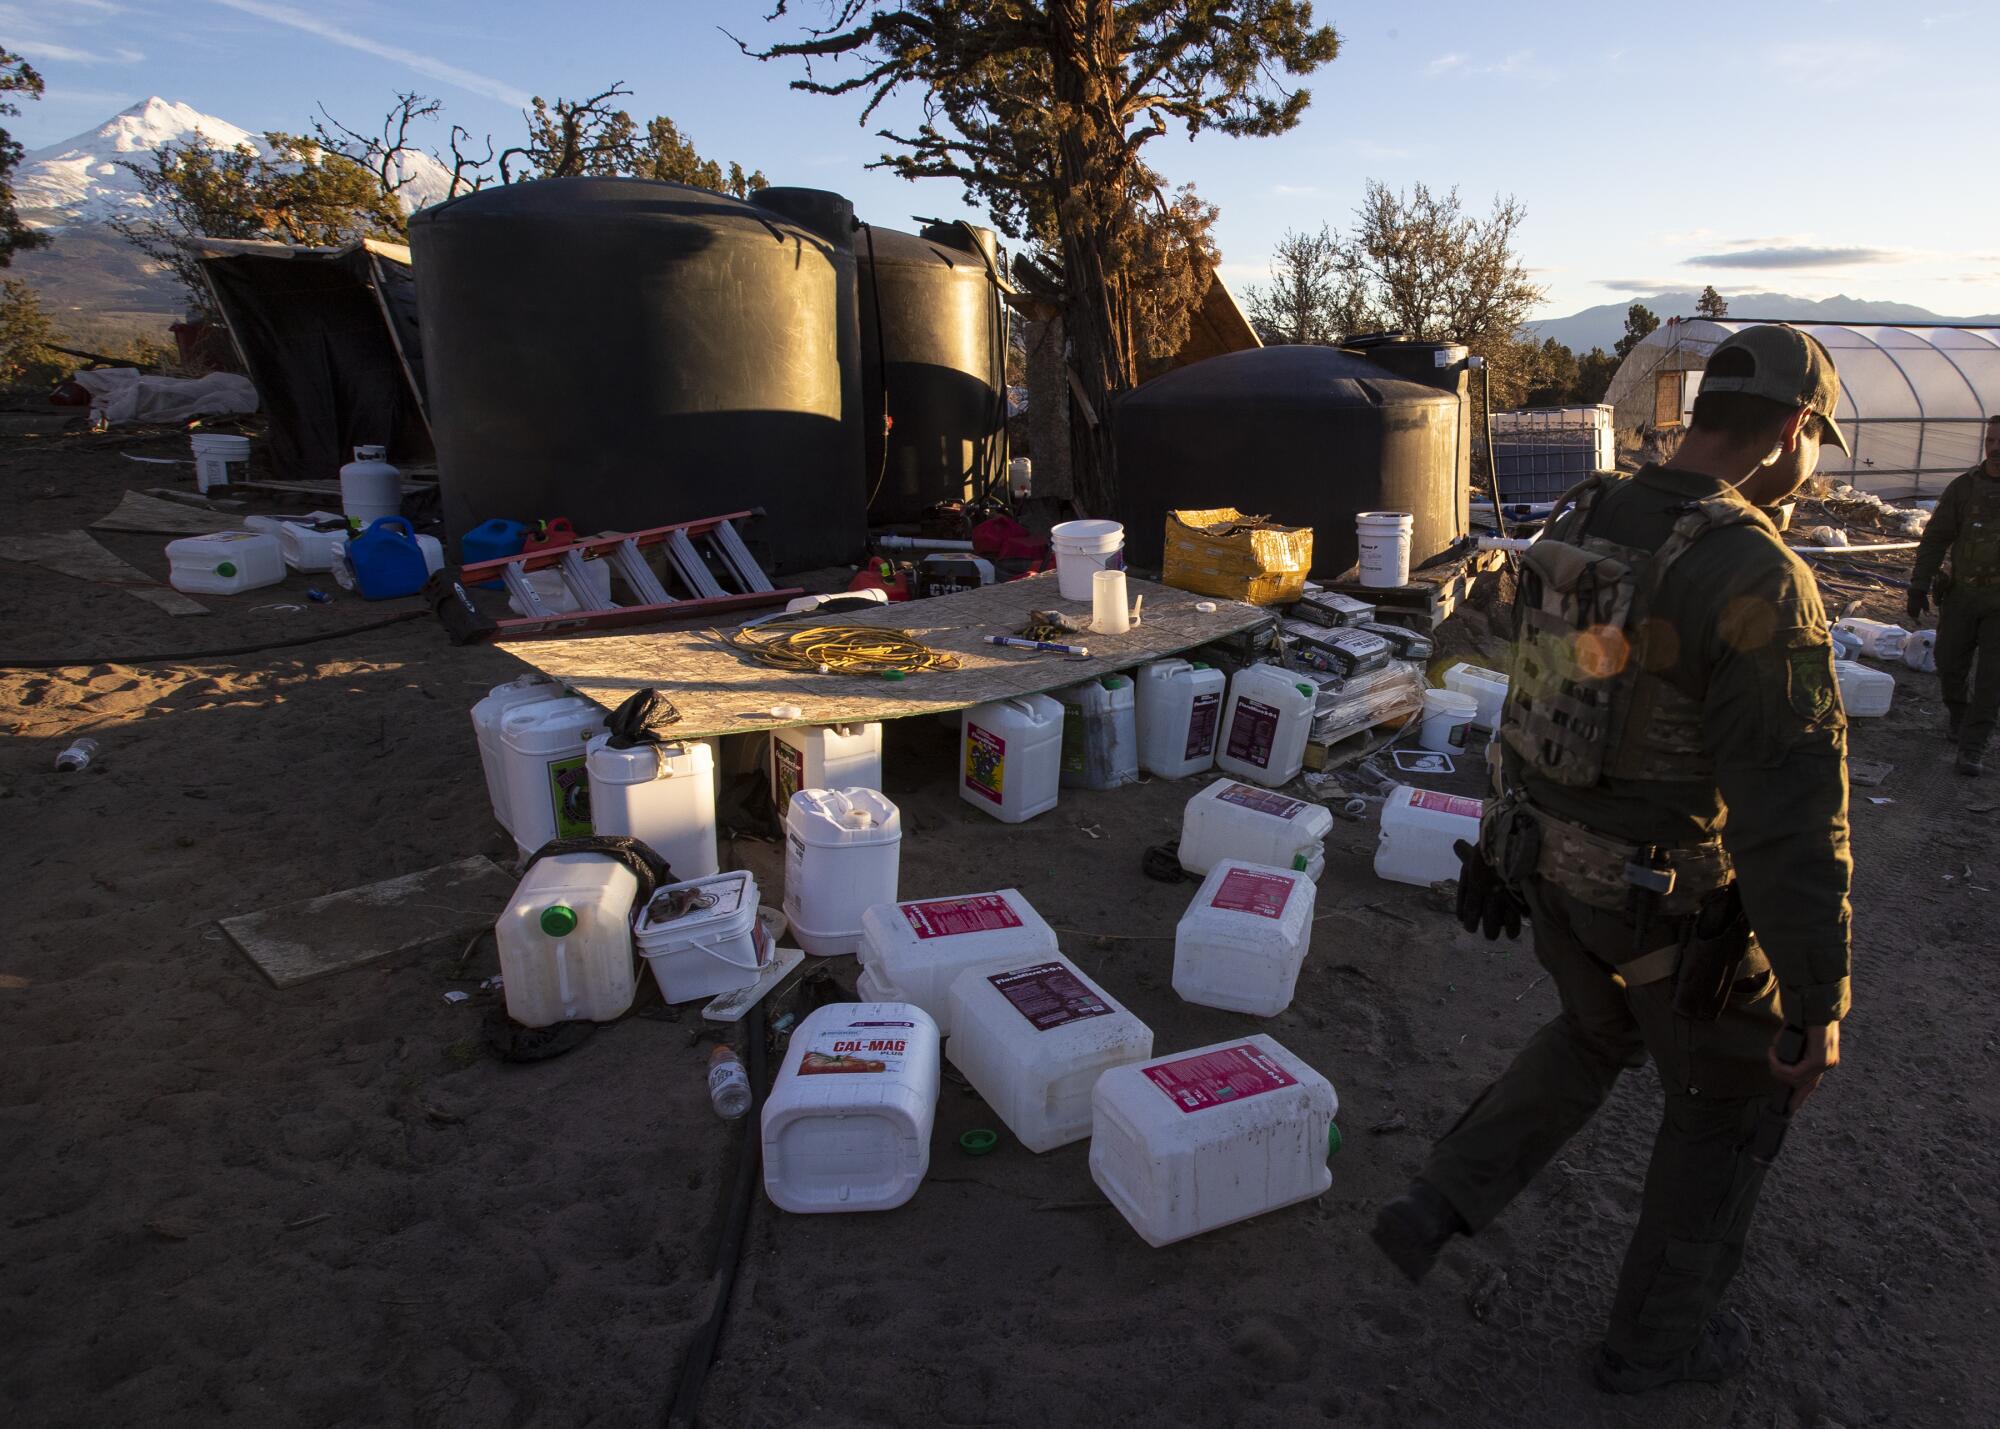 Sheriff's deputies serving a search warrant on an illicit marijuana operation walk past containers of fertilizer